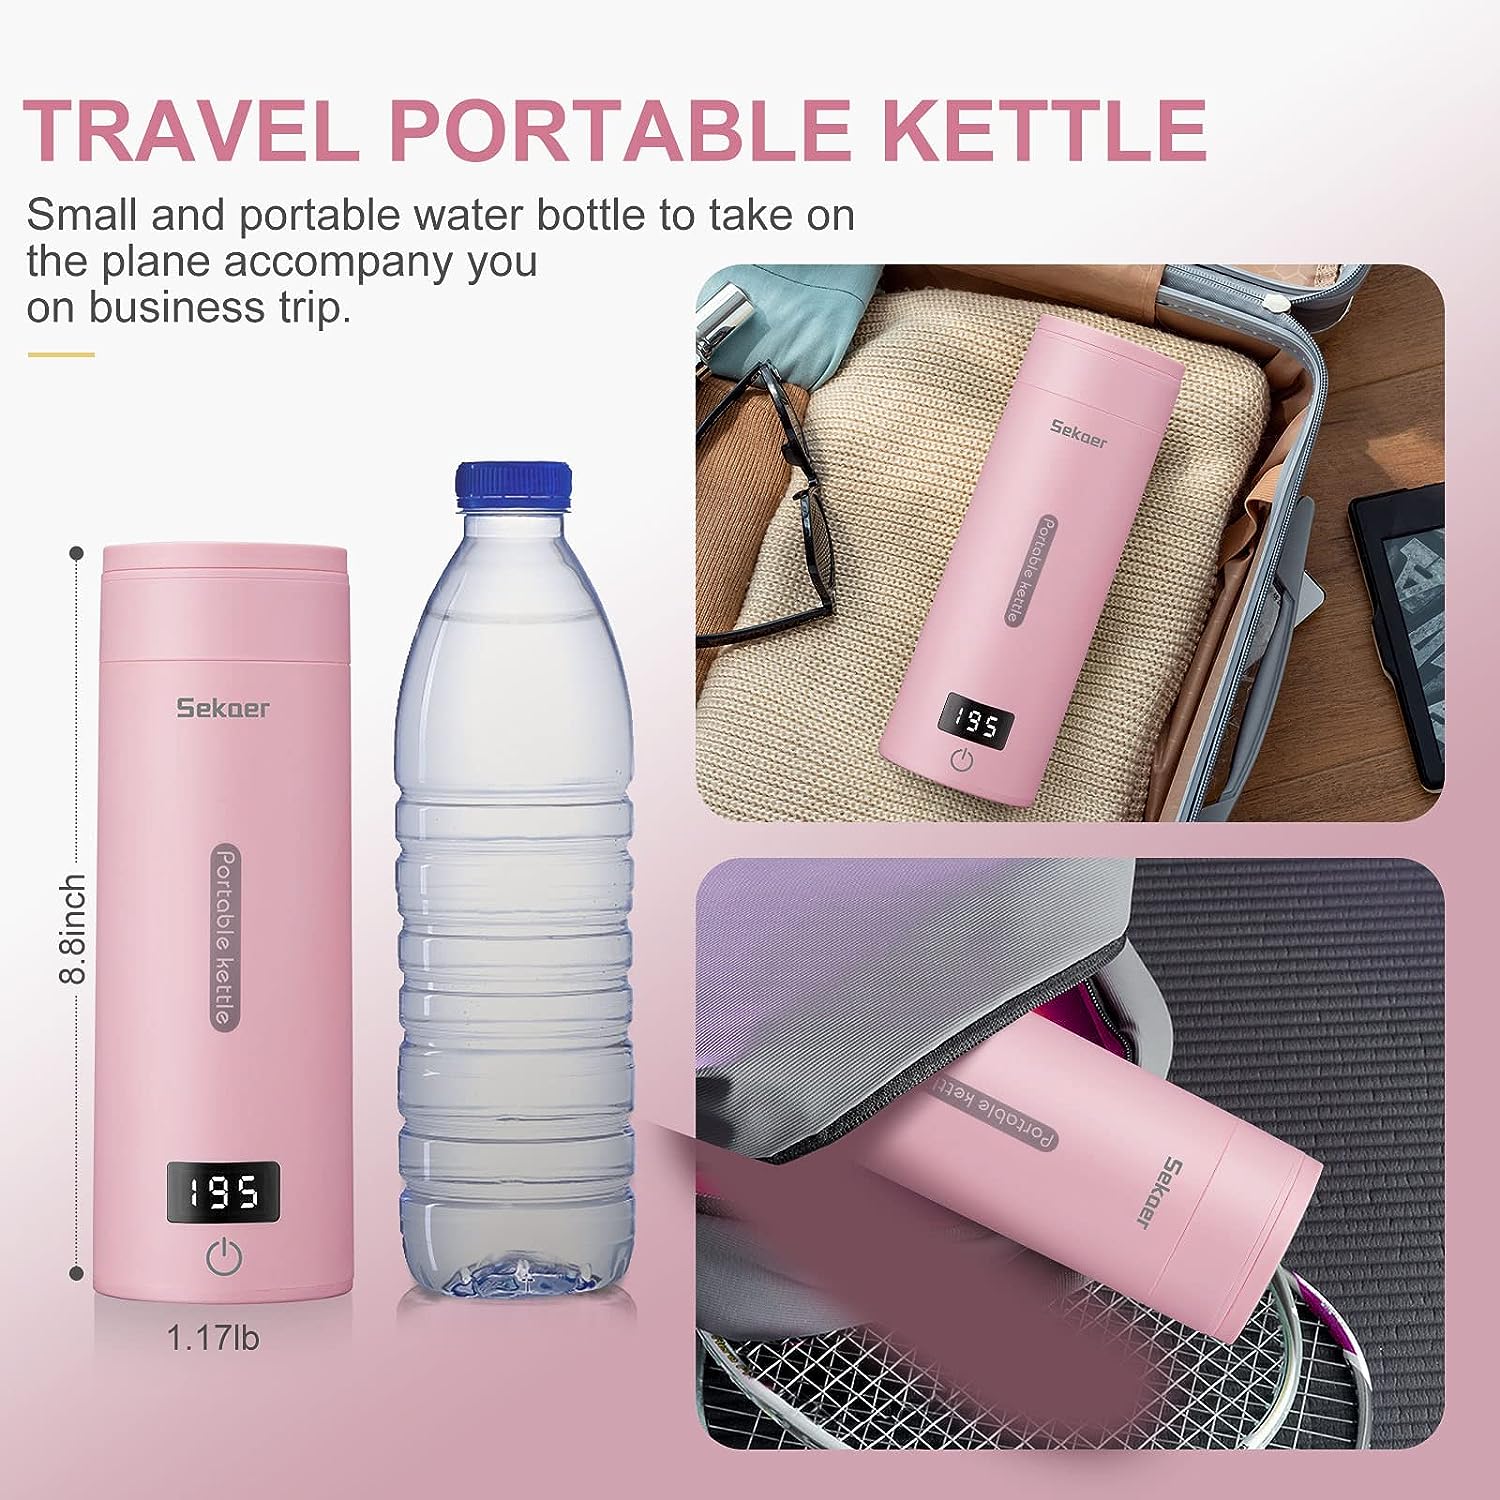 Travel Electric Tea Kettle: Your Perfect On-The-Go Companion